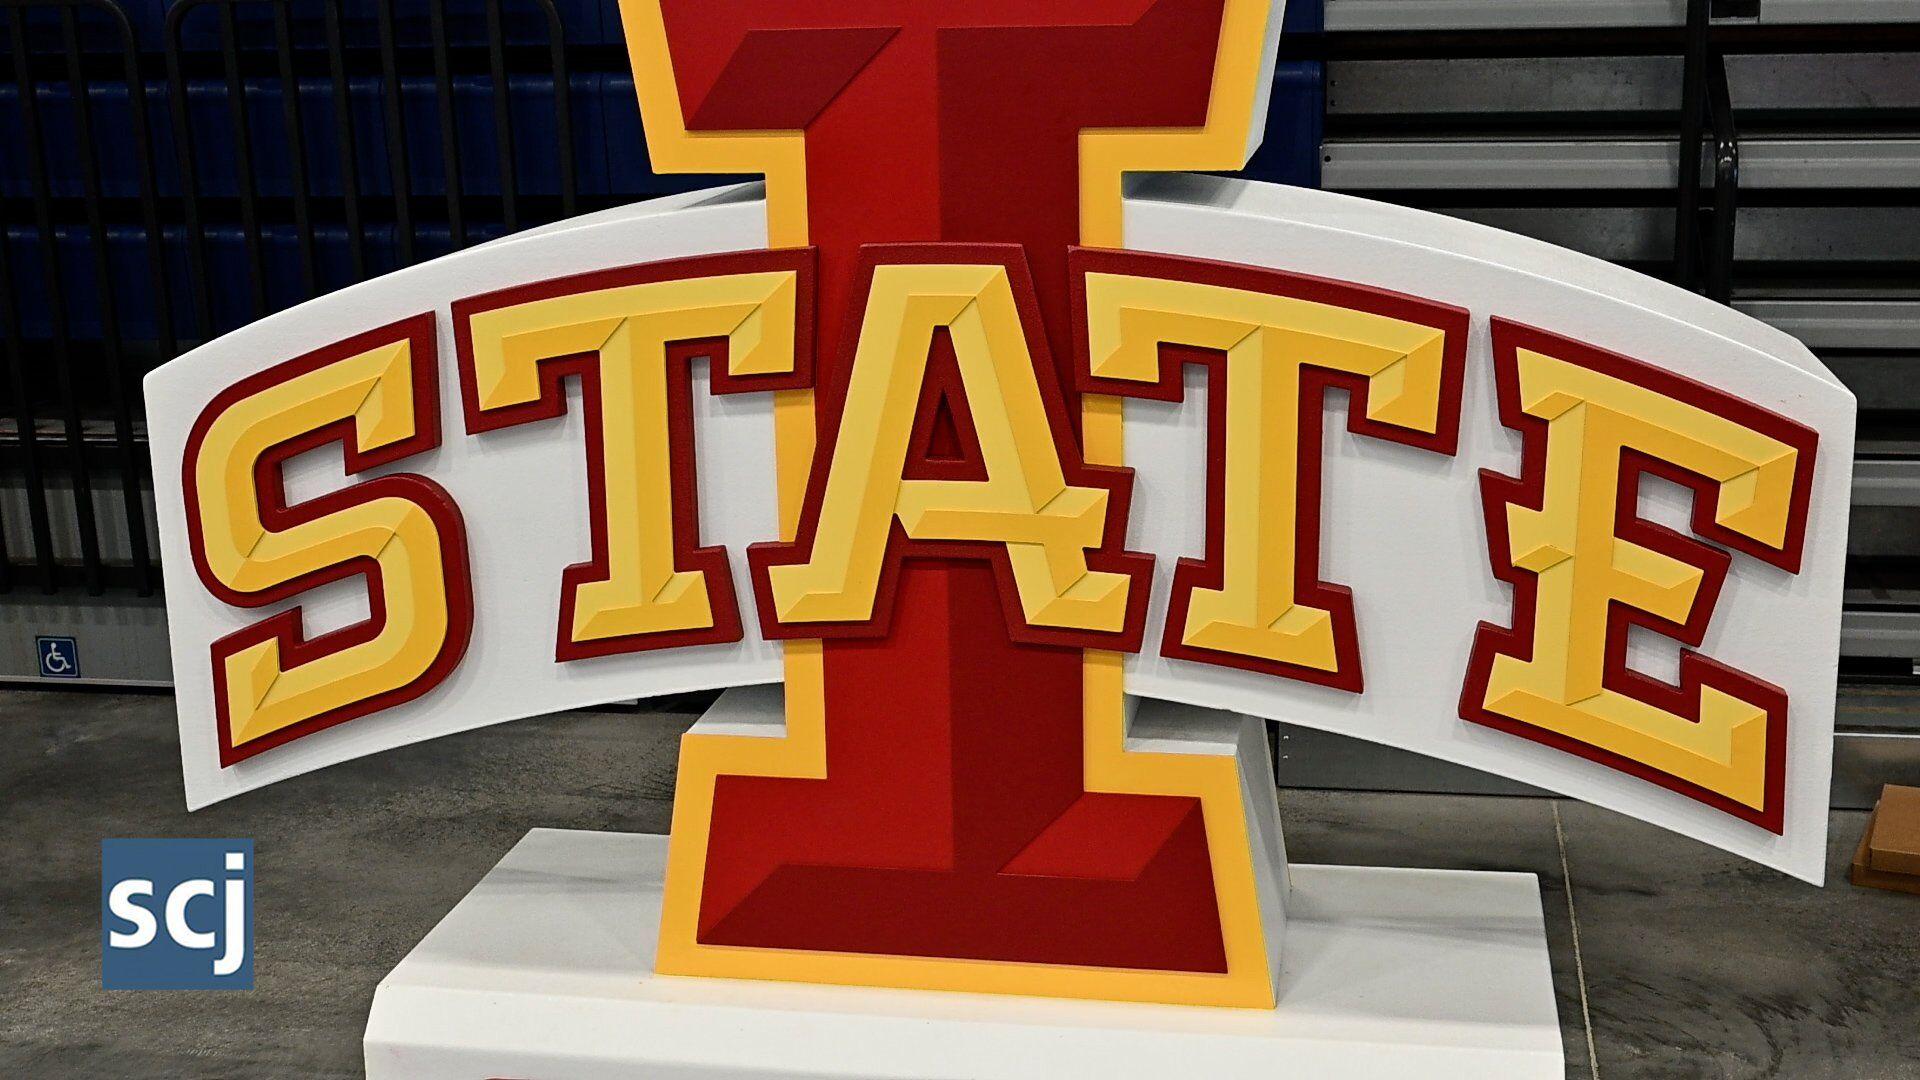 Cyclones' Tailgate Tour makes stop in Sioux City